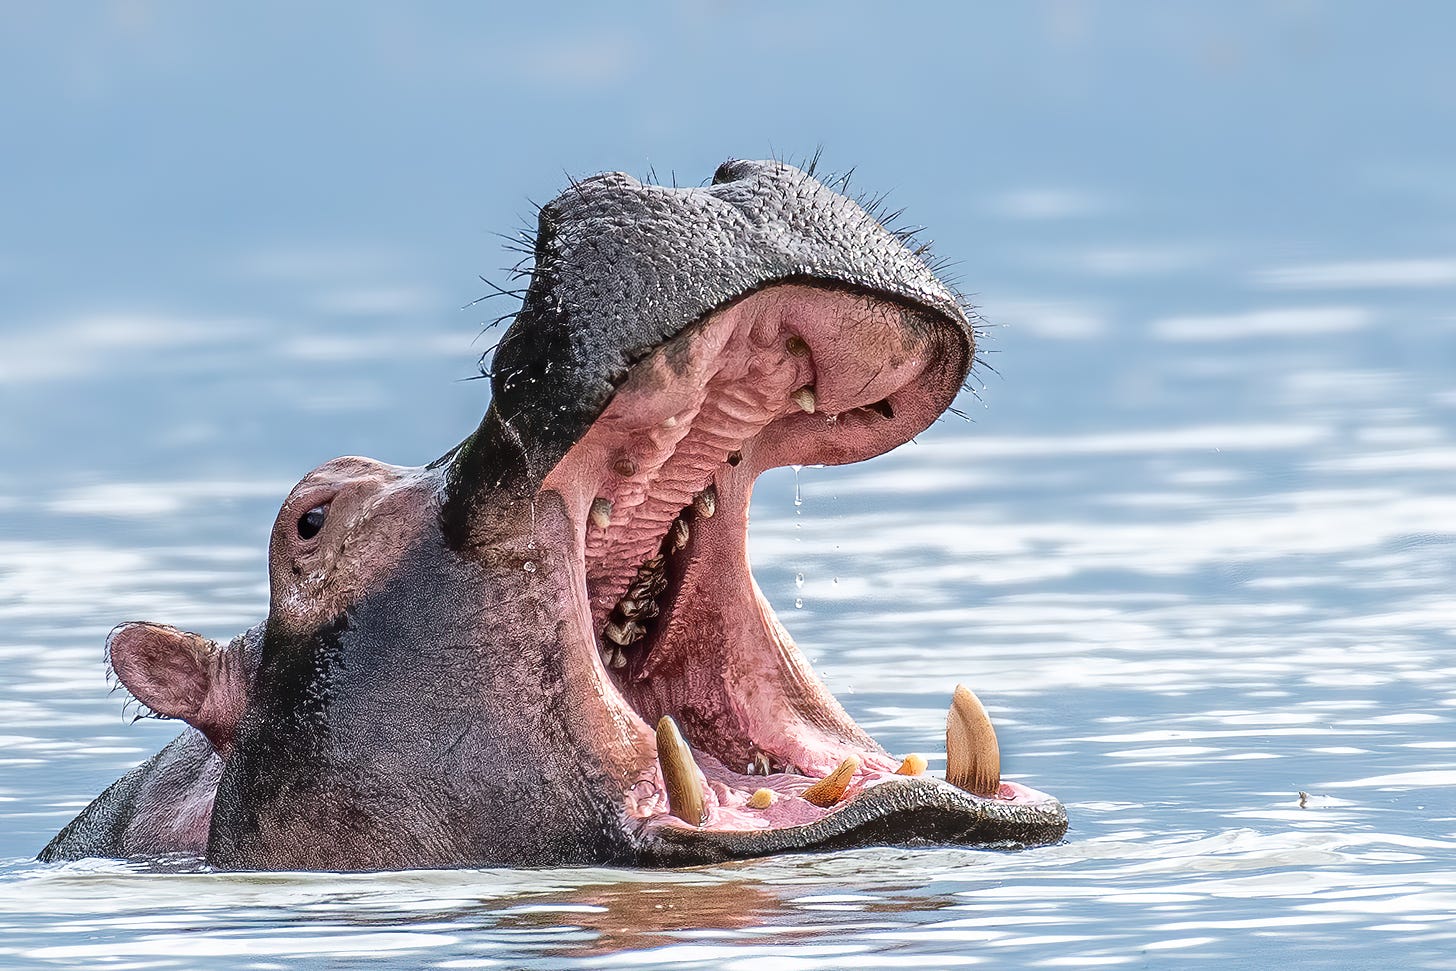 A hippo emerges from the water, with it's mouth open wide, bearing sharp teeth.